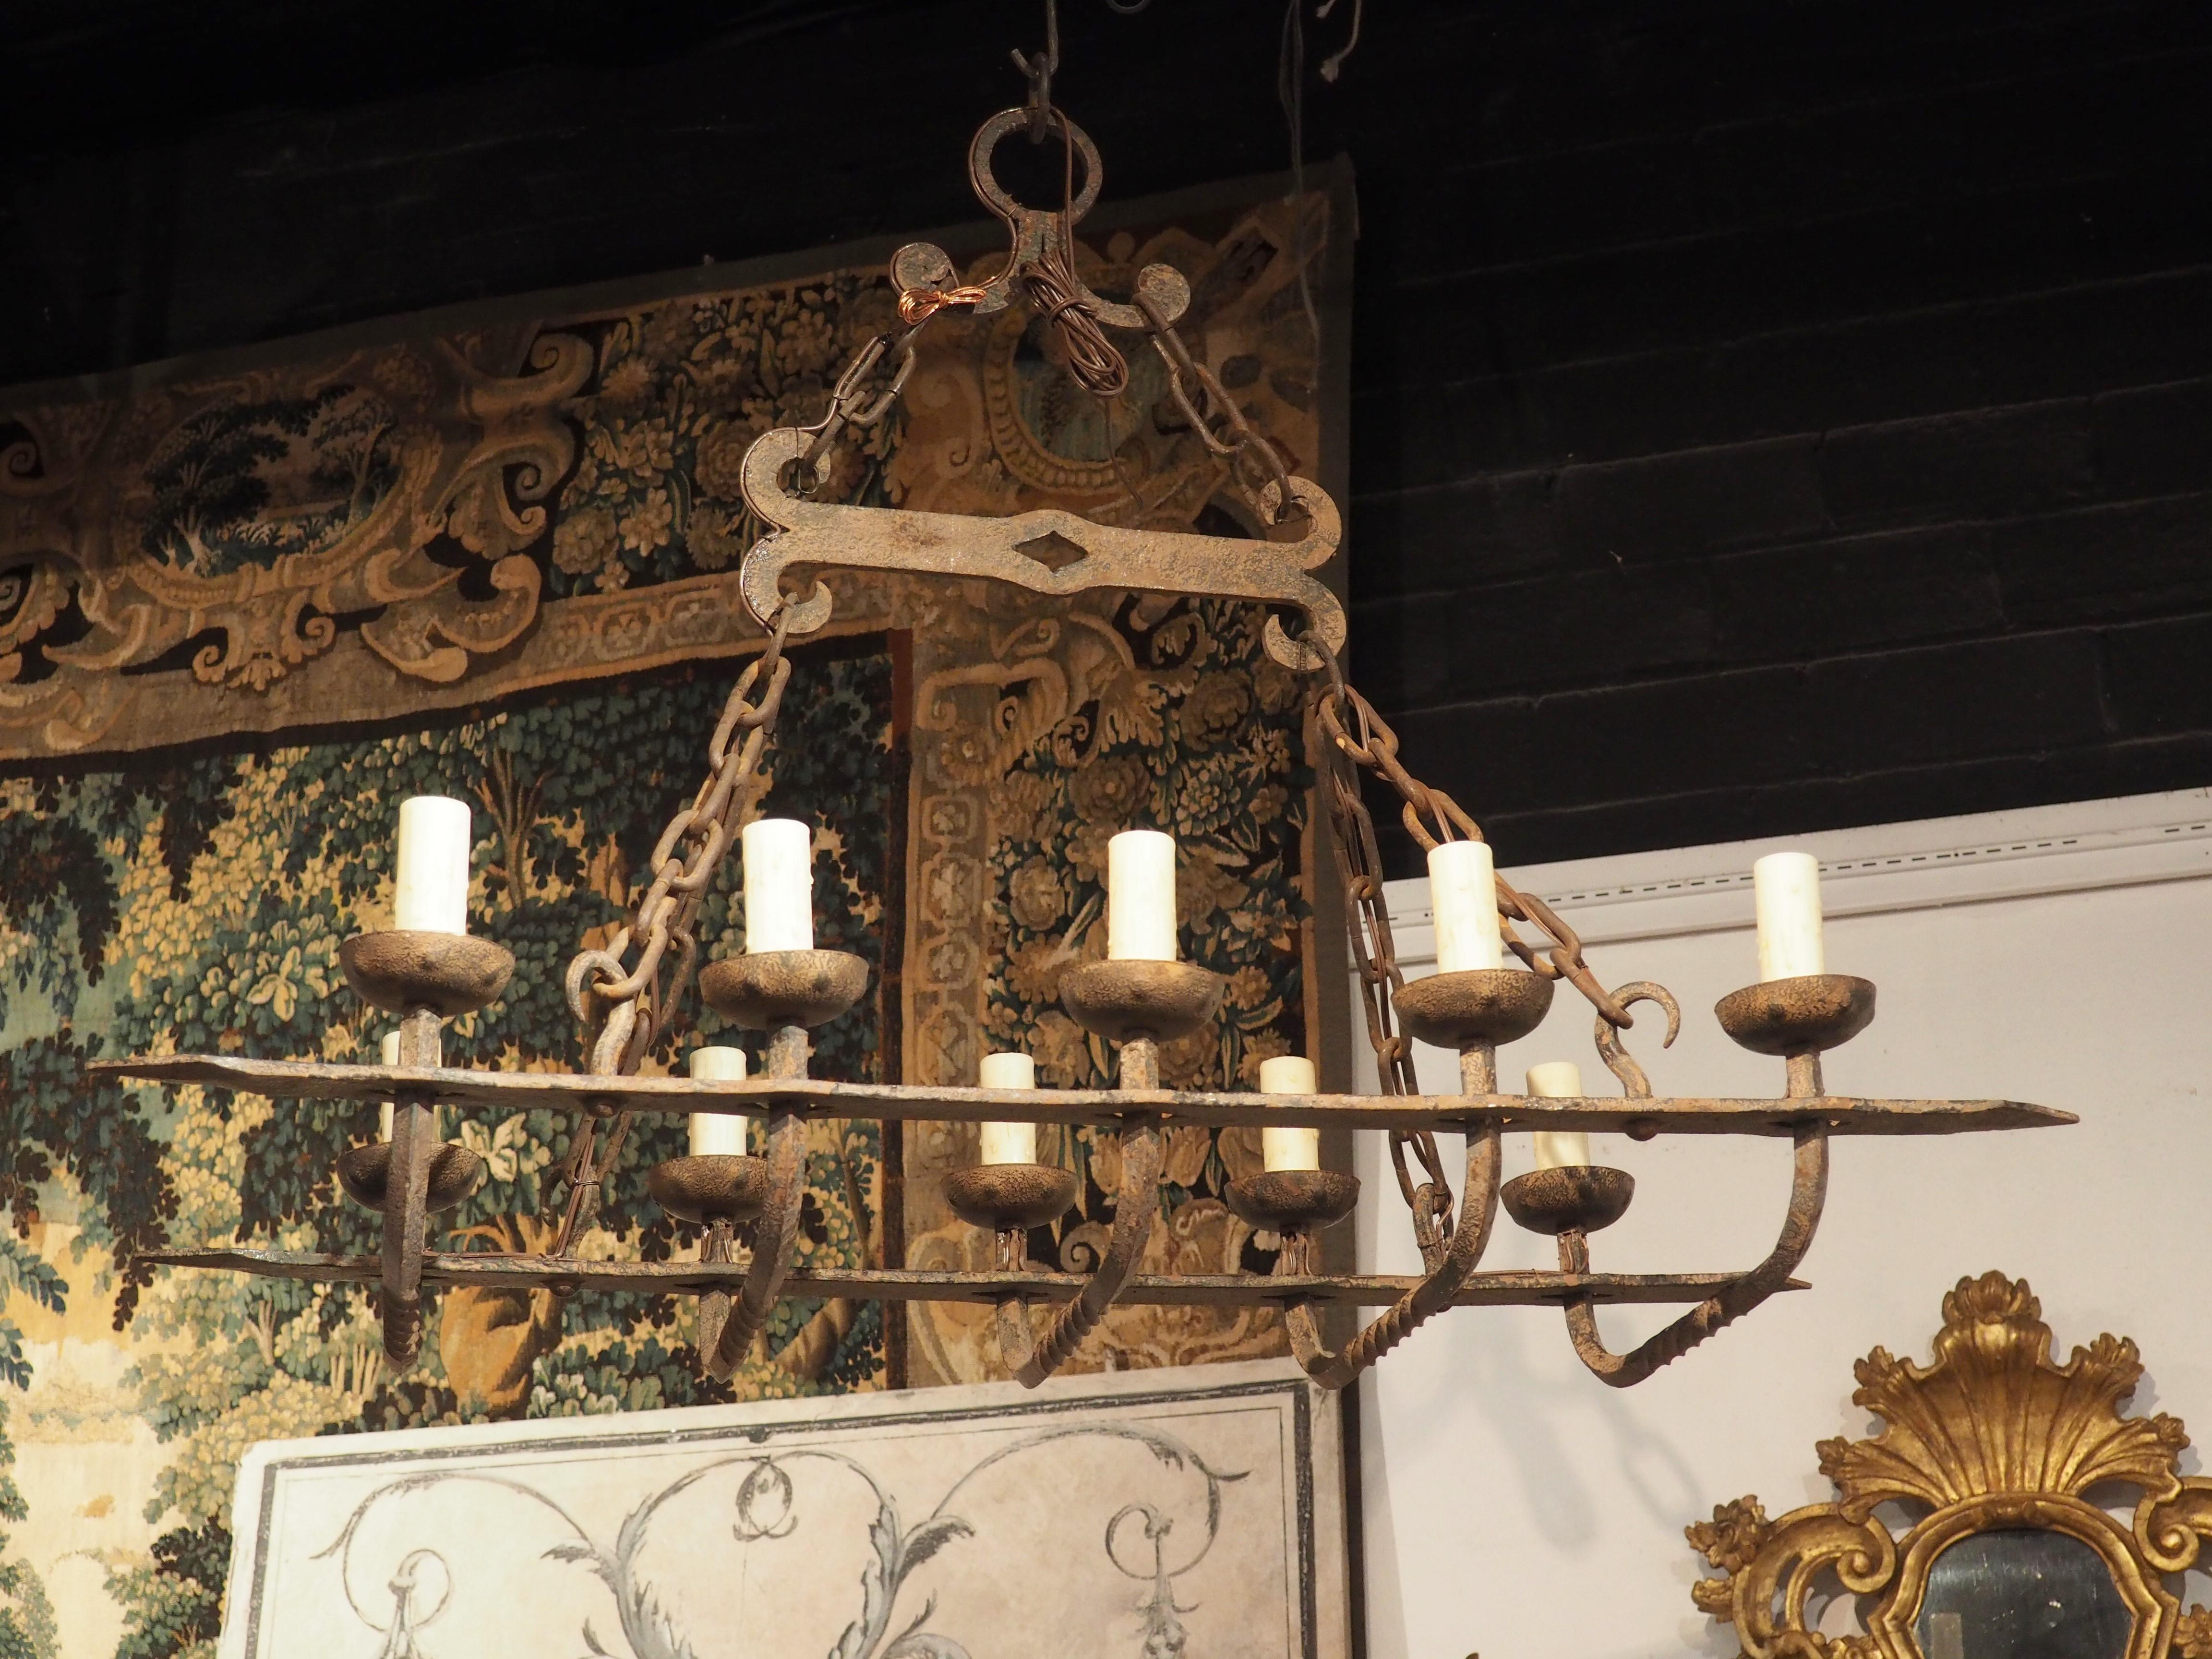 This rustic antique French ten light iron chandelier has been hand forged into a rectangular shape. There are five square iron rods turned diagonally with twist turned motifs at the bottom center. At the ends of these rods and curving upwards